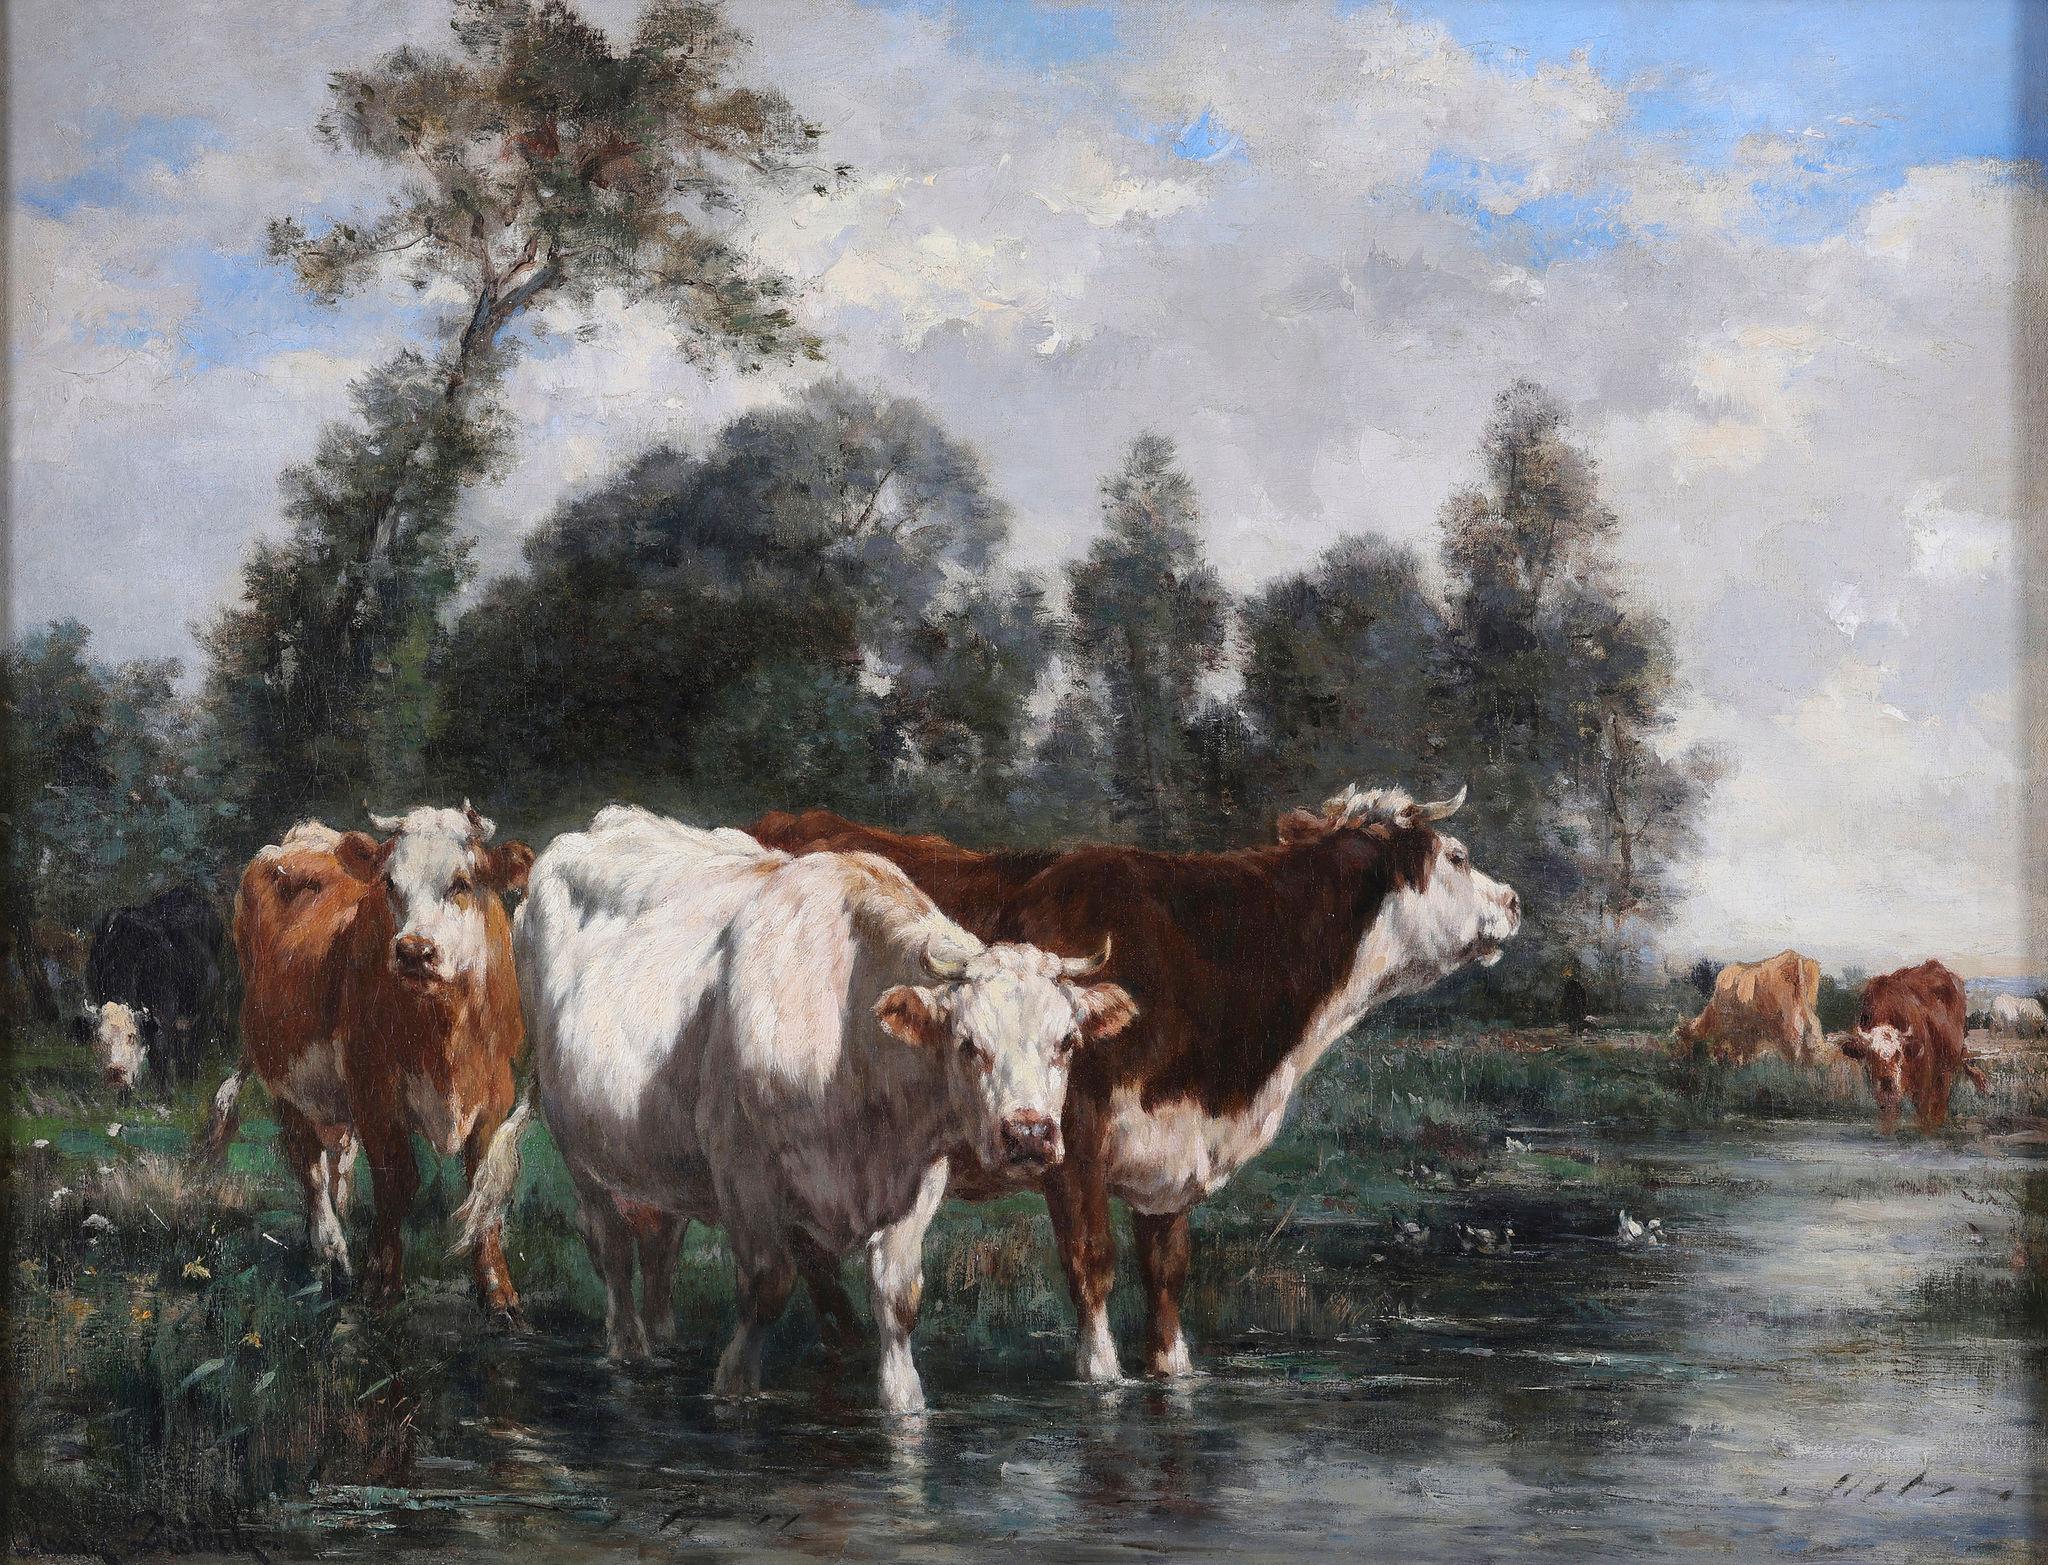 Cattle by a River. Oil on Canvas - Painting by Marie Dieterle